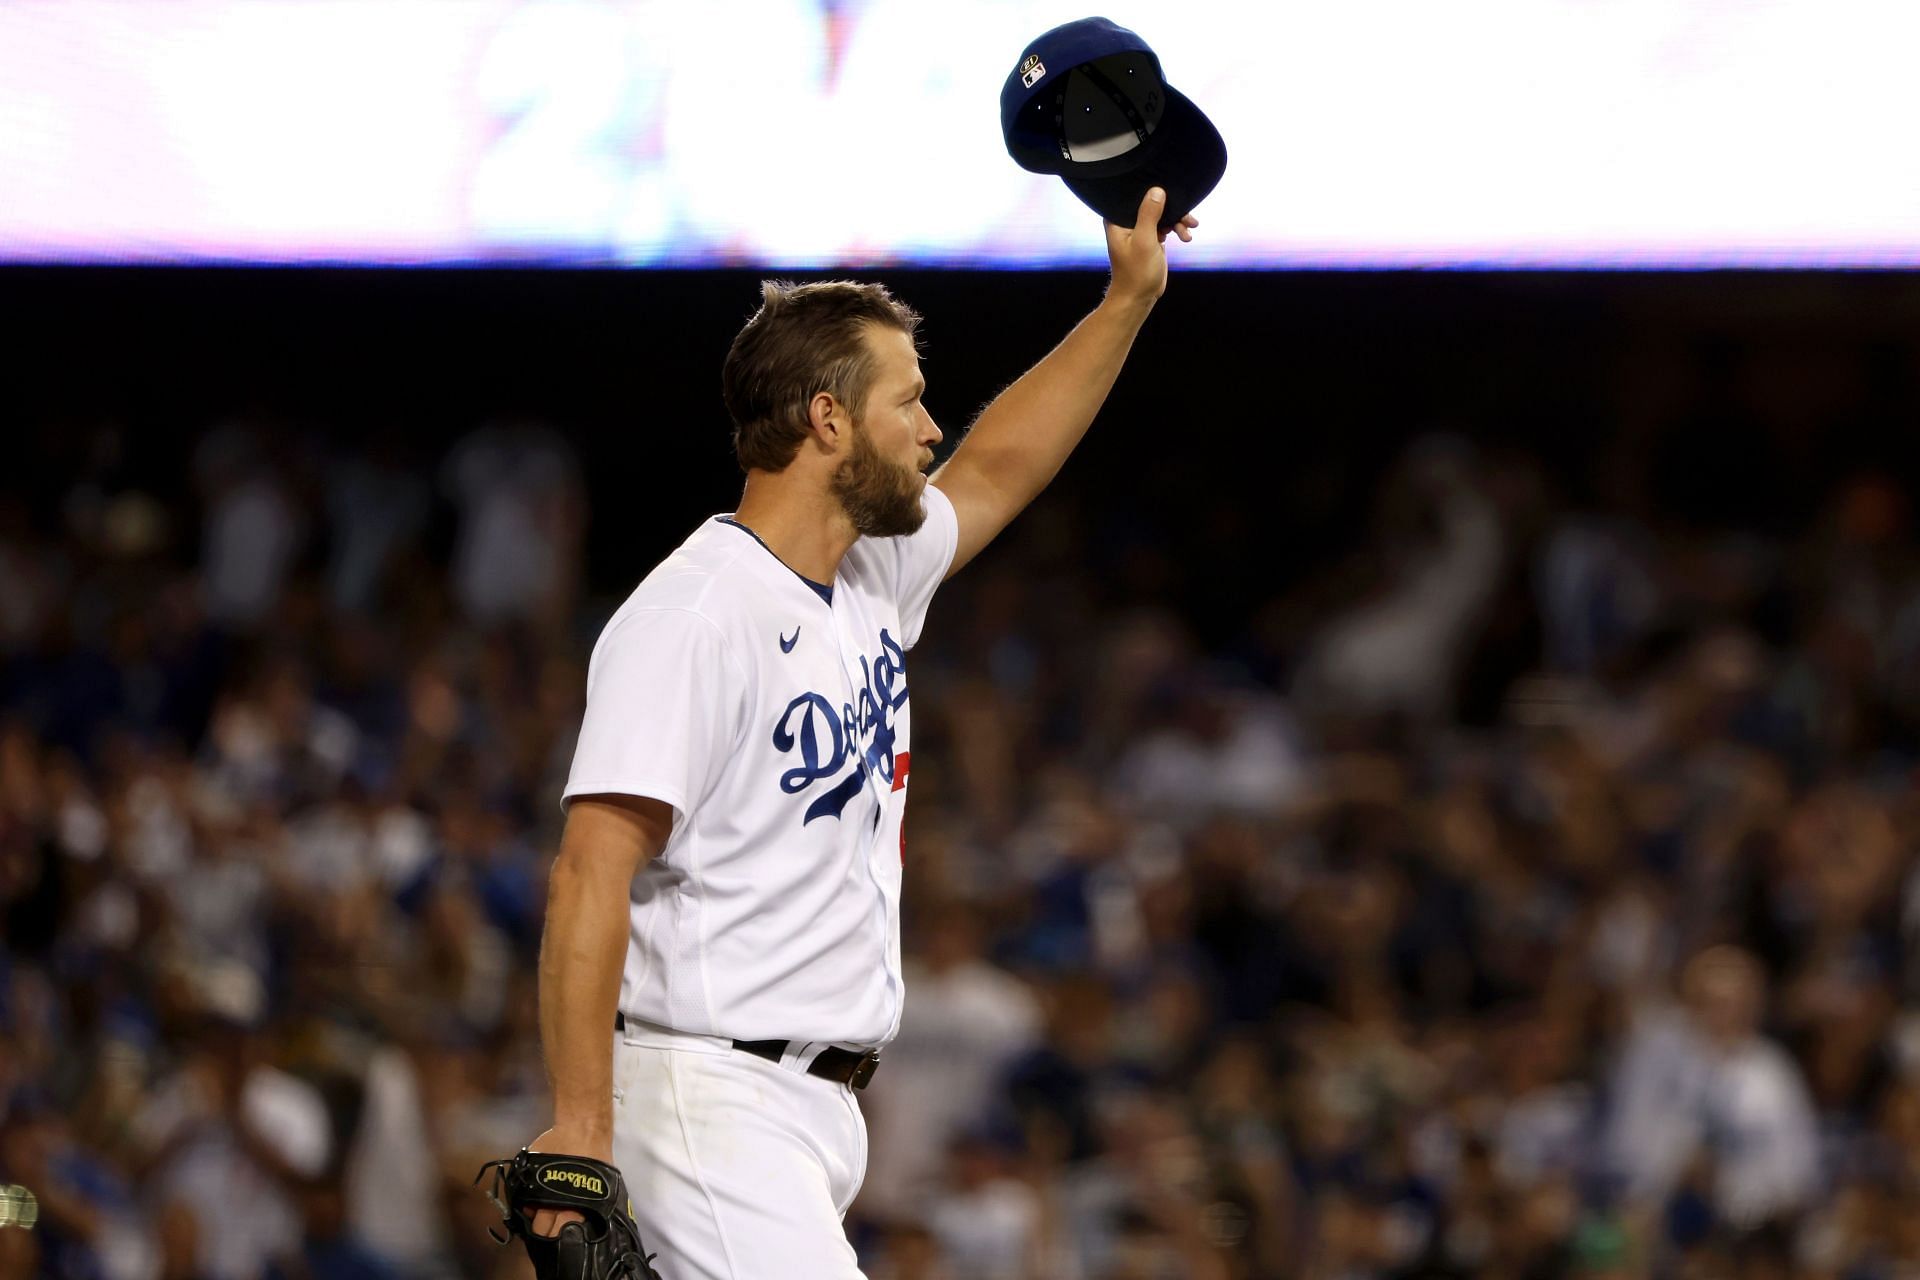 Los Angeles Dodgers southpaw Clayton Kershaw tips his cap to the fans as they give him a thunderous ovation for passing Don Sutton&#039;s record for most strikeouts acquired by a pitcher in a Los Angeles Dodgers uniform.